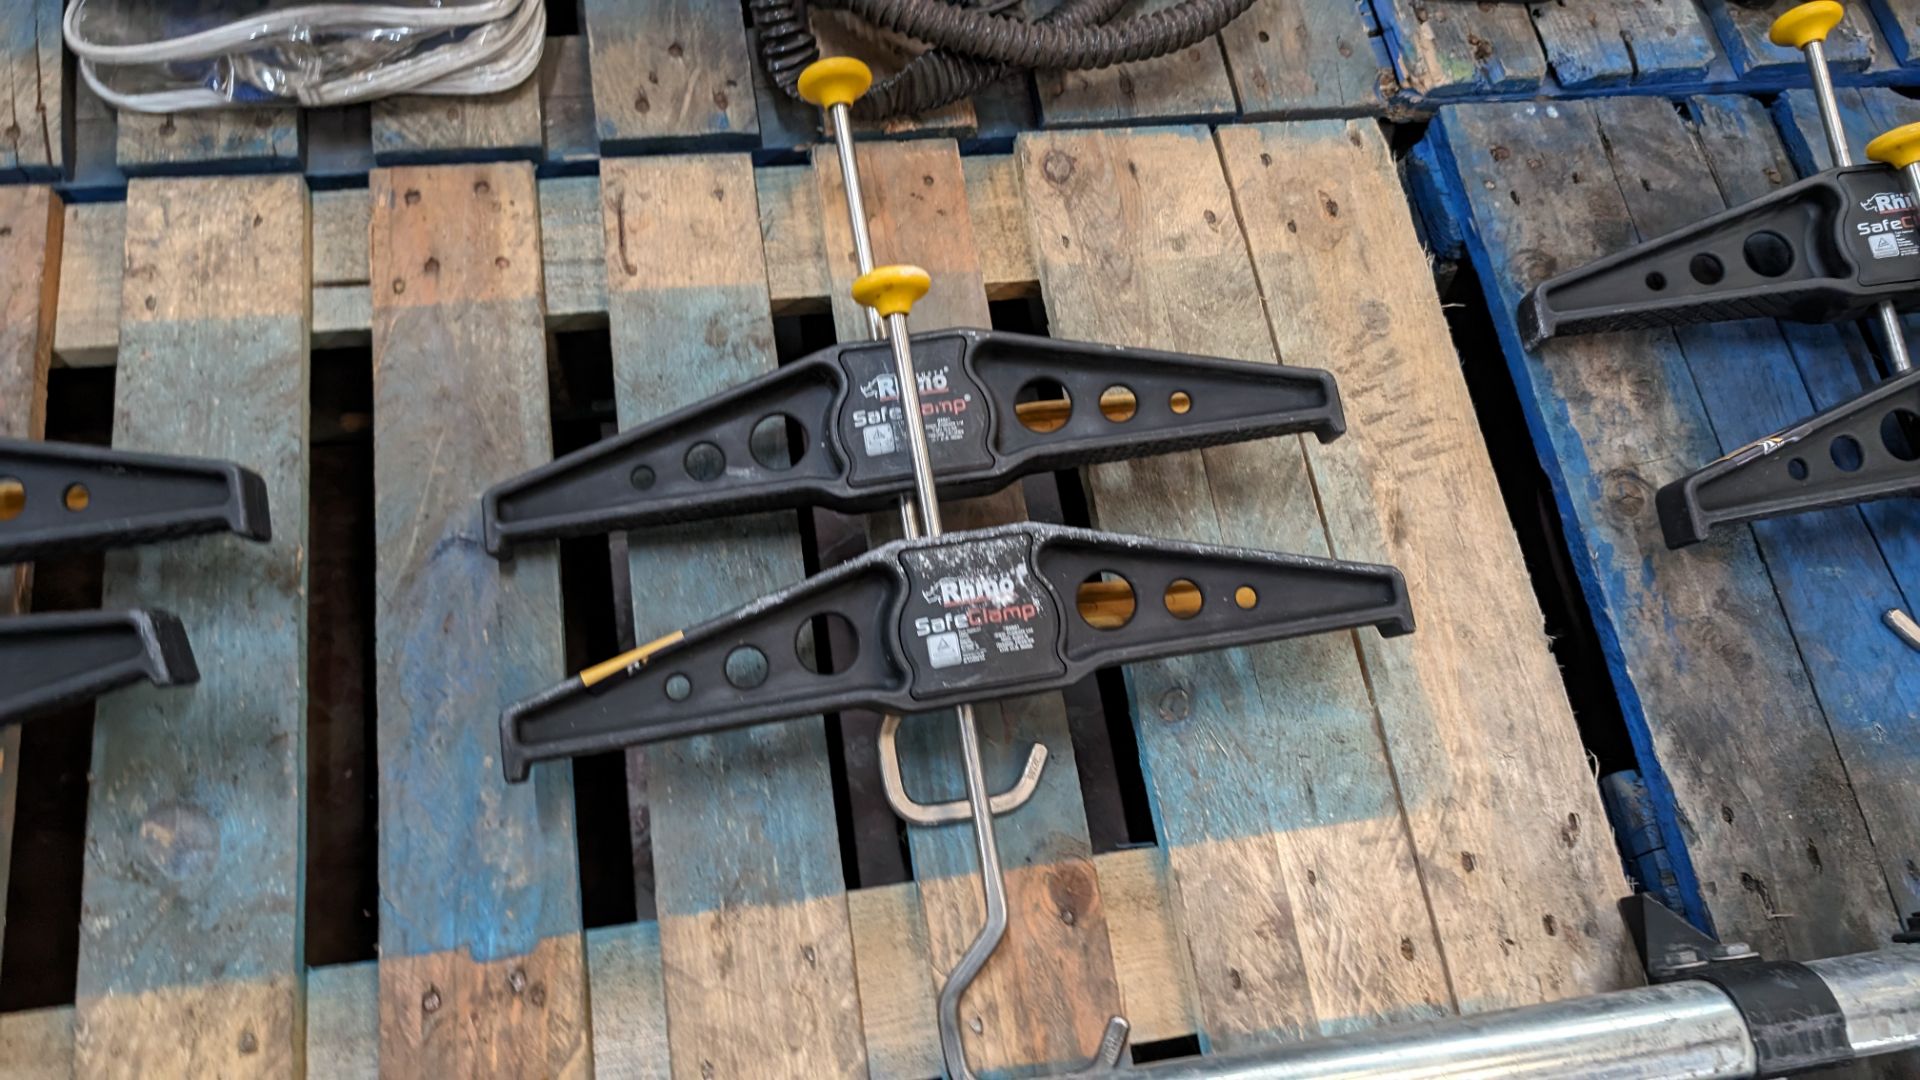 2 off Rhino safe ladder clamps - Image 2 of 3